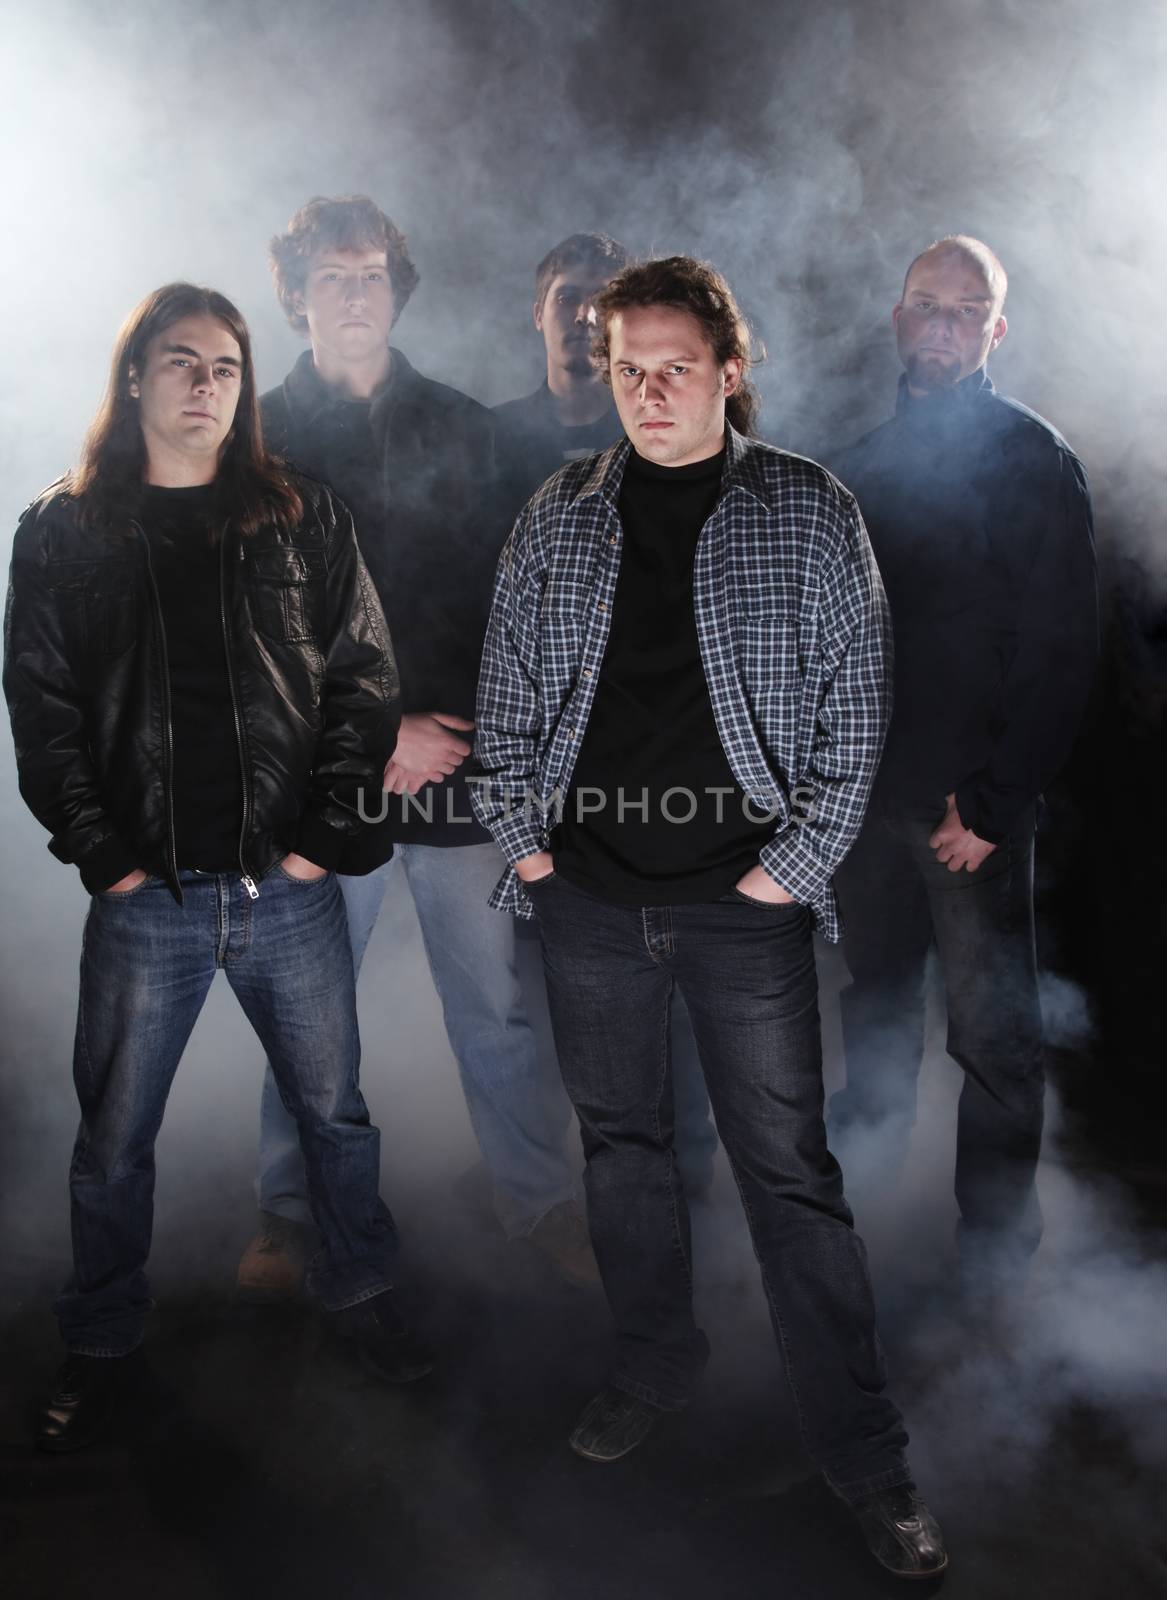 Group portrait of a rock band.